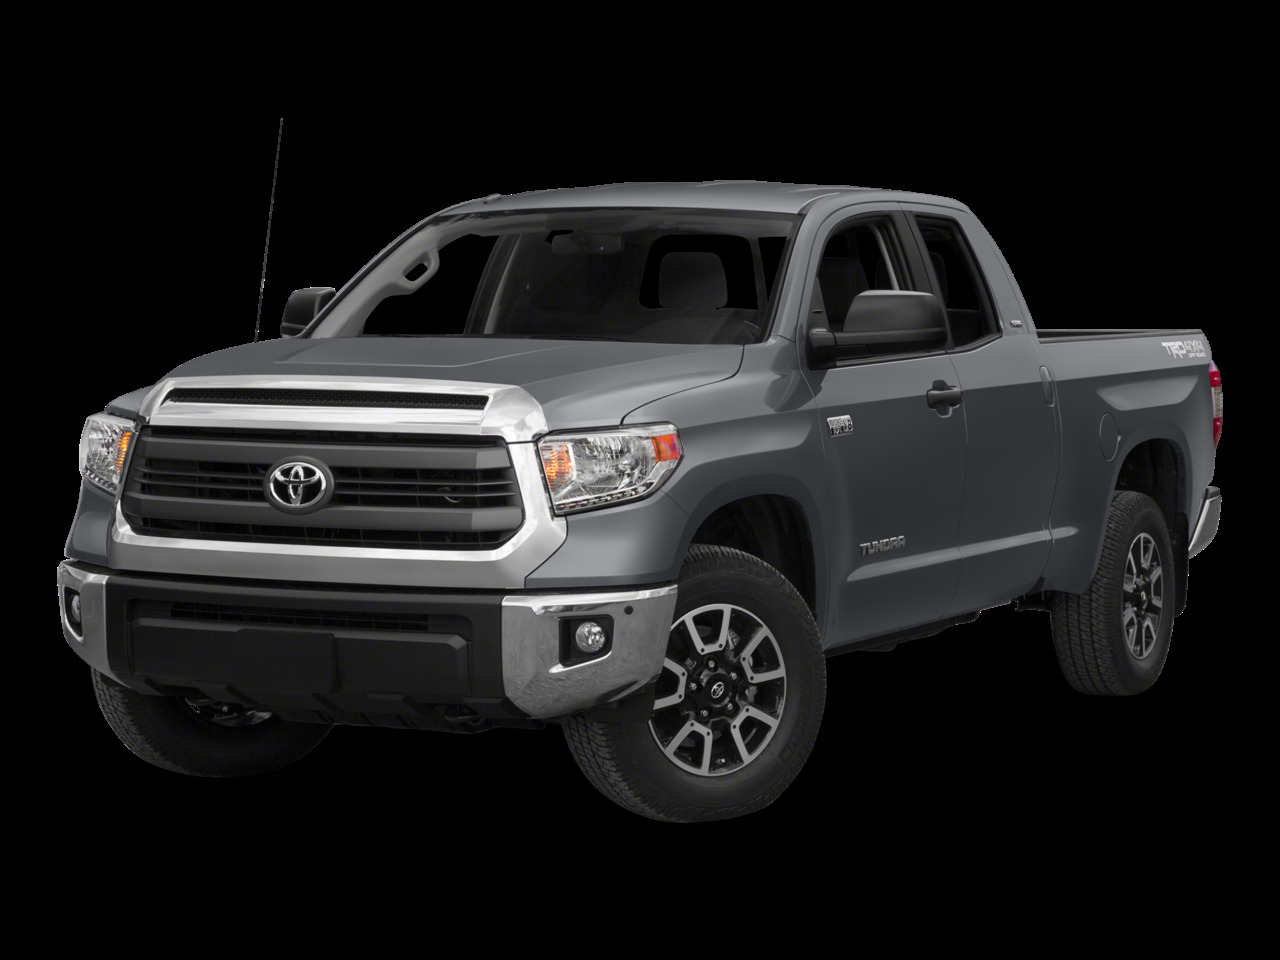 2015 Toyota Tundra SR 5.7L V8 **NEW TRADE IN ARRIVING SOON!**